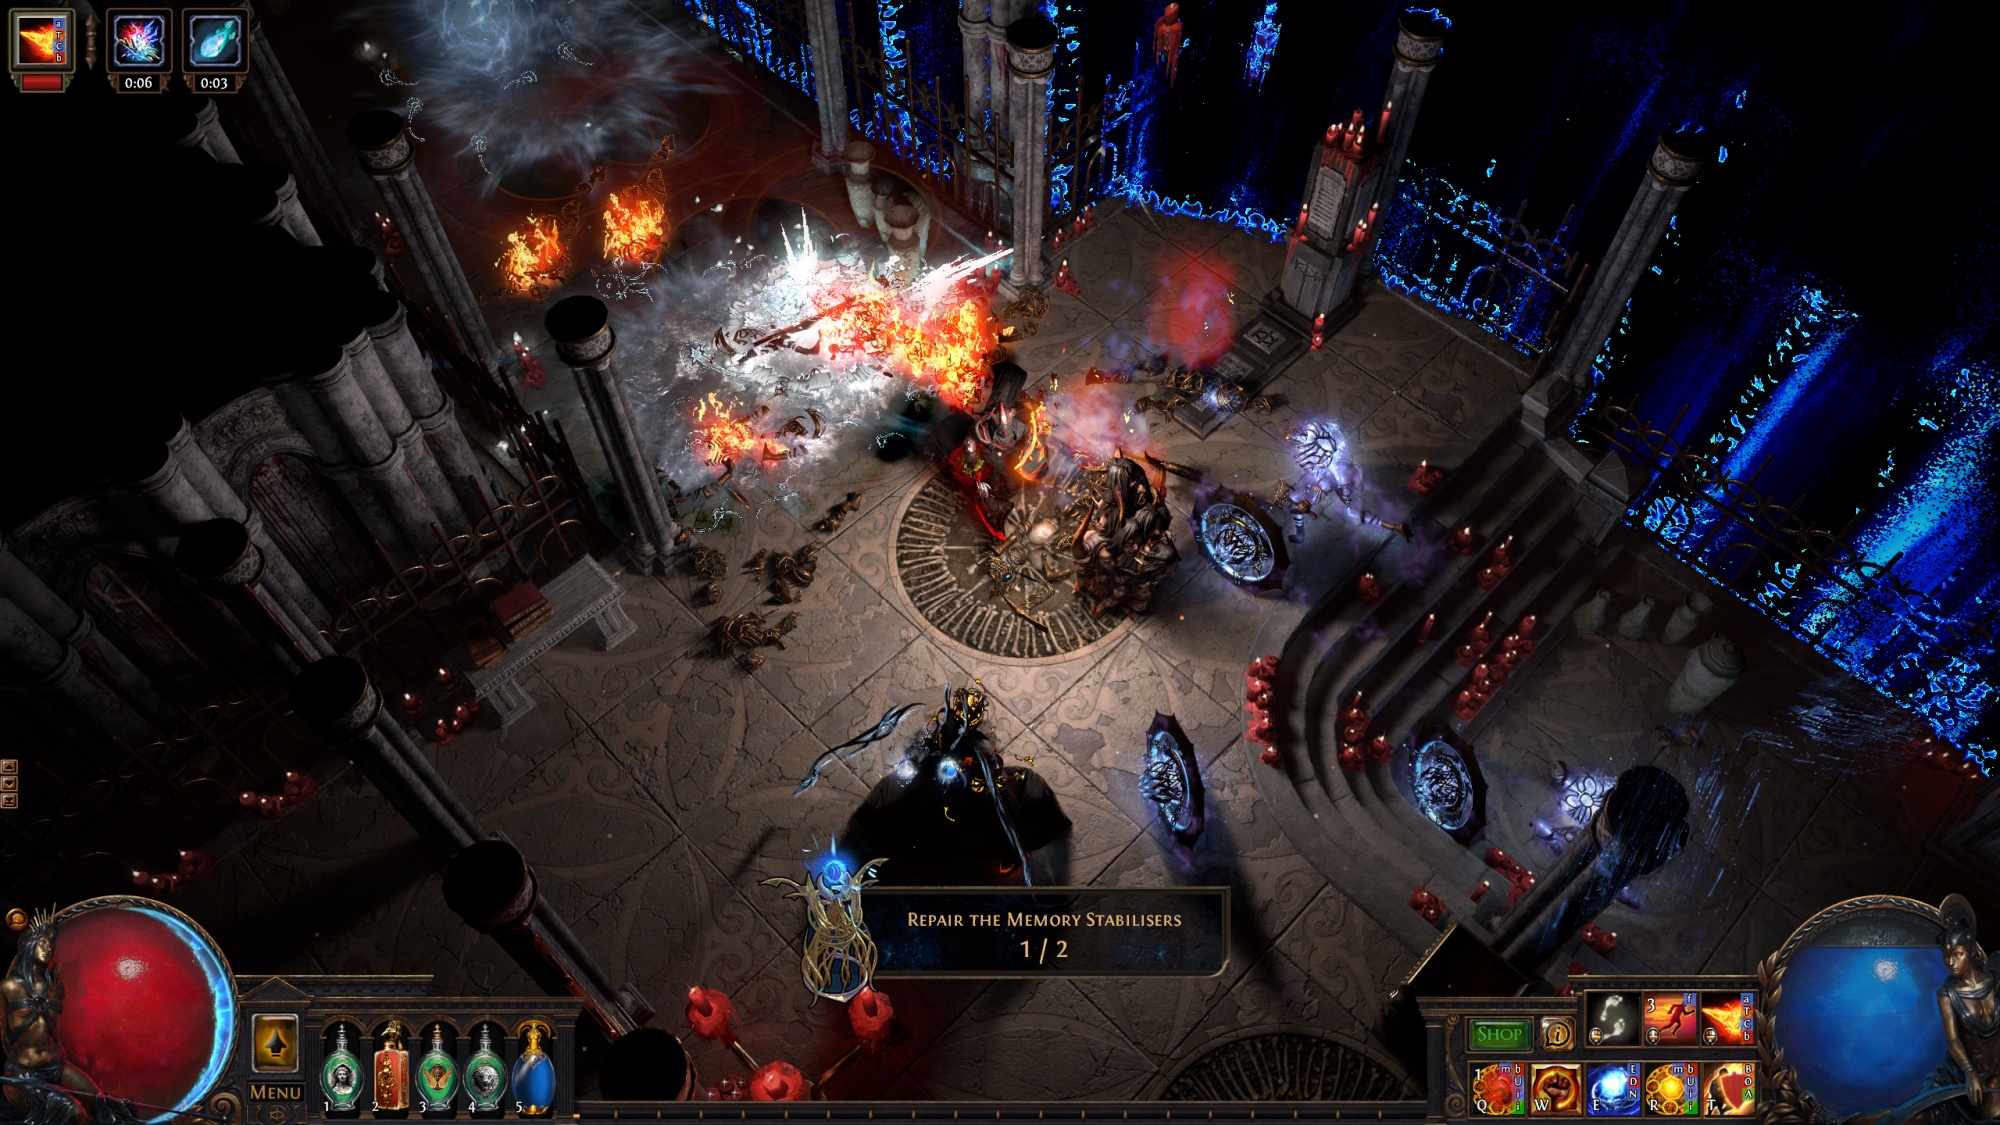 path of exile how to use addons